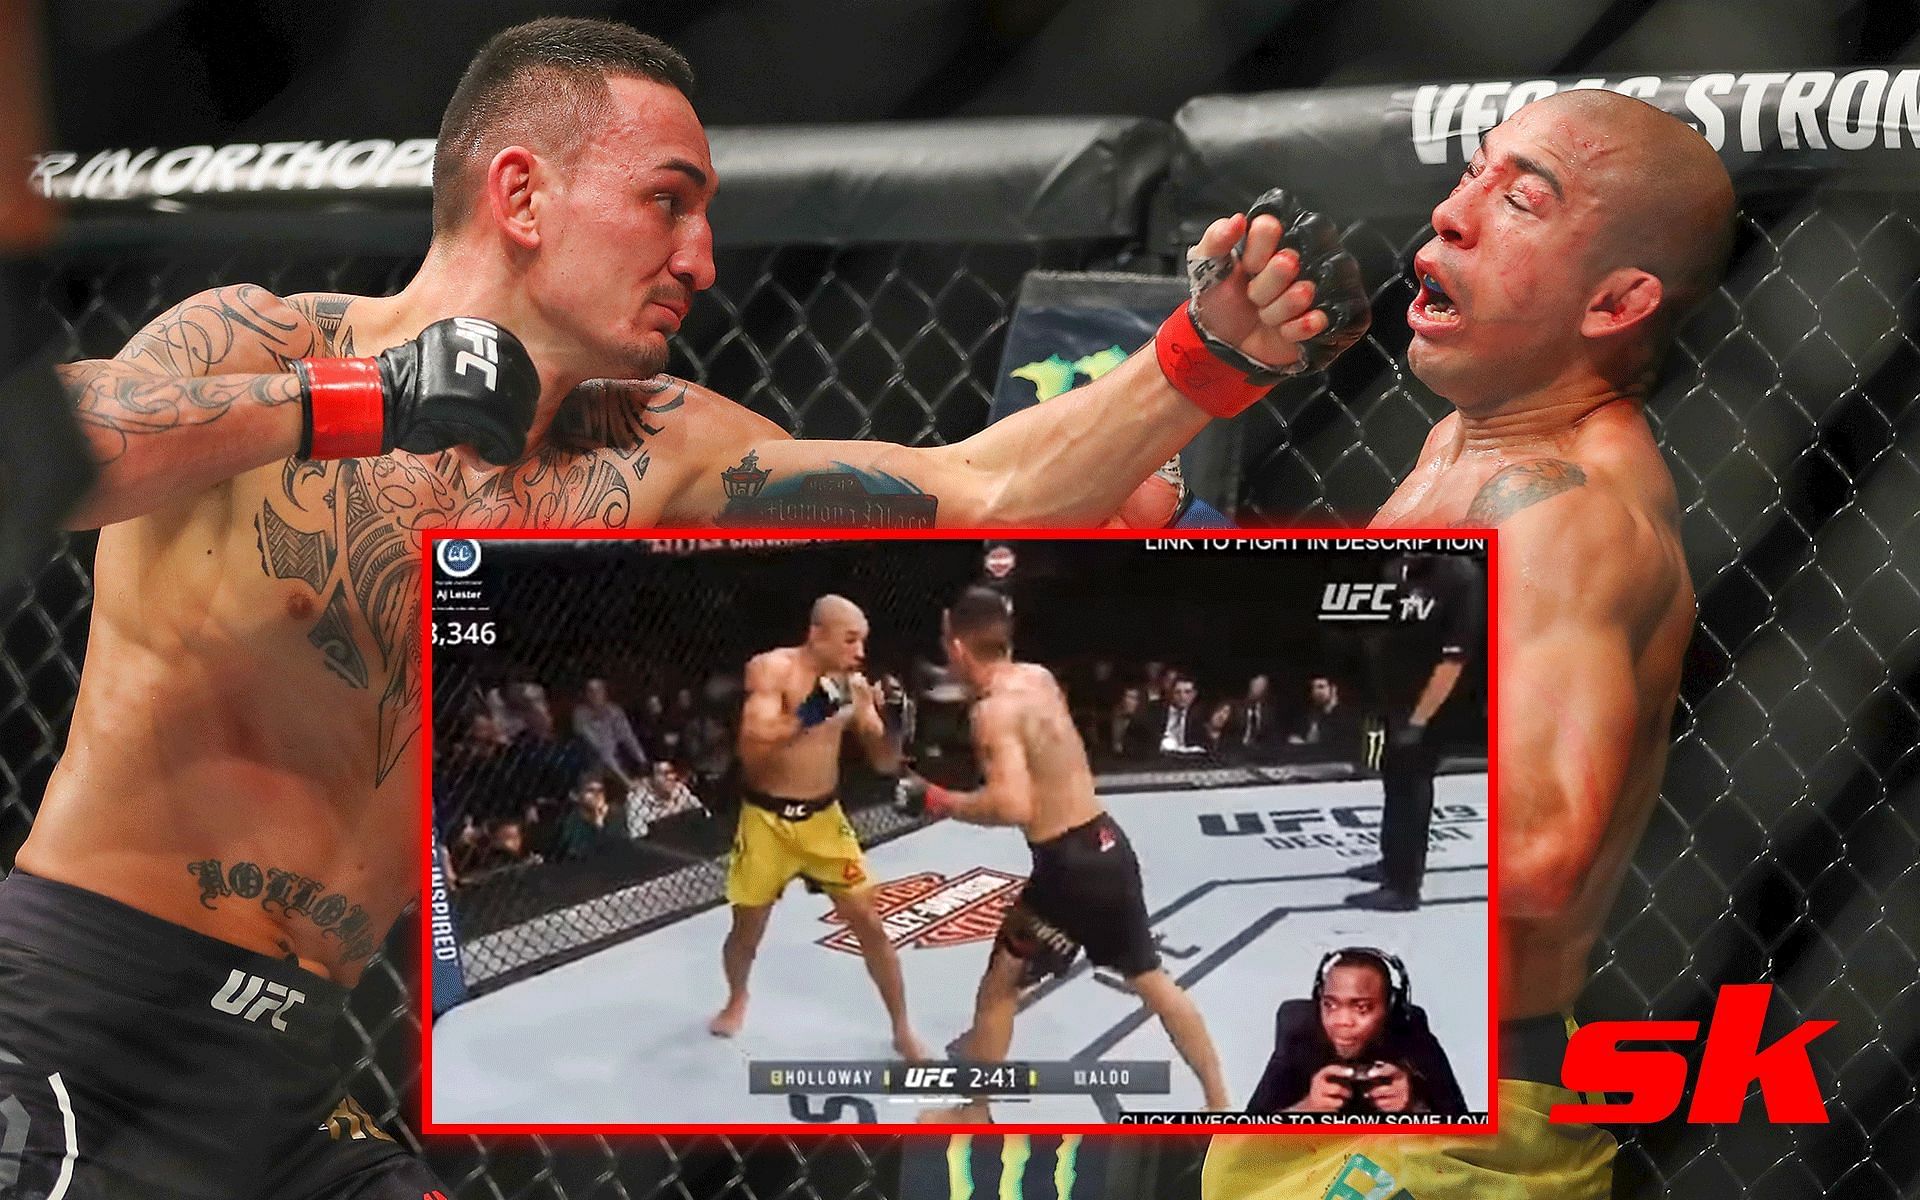 WATCH When a Twitch streamer pretended to play UFC game to stream an actual pay-per-view event live